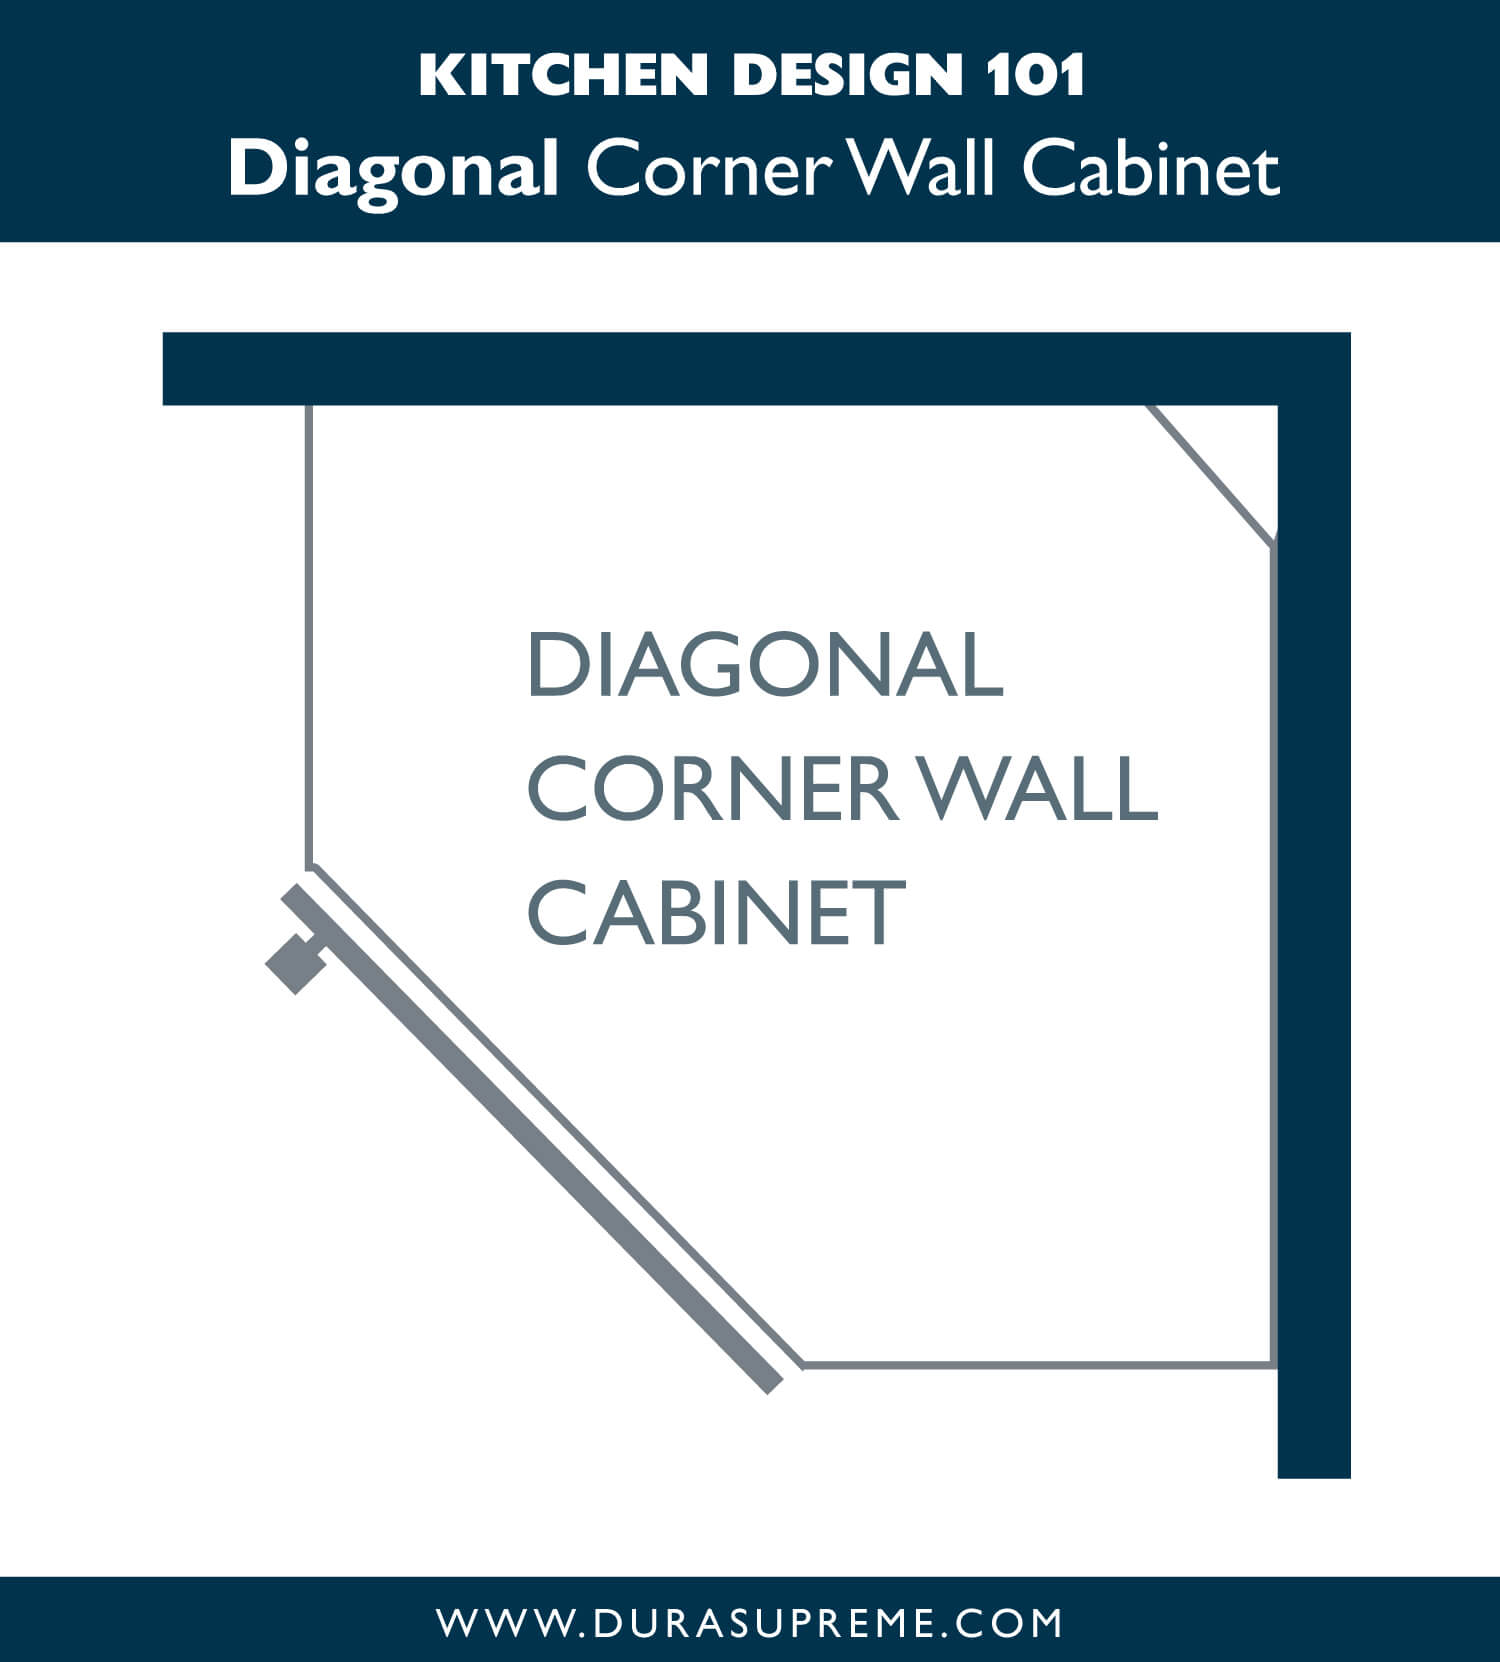 Kitchen Design 101: What is a Diagonal Corner Wall Cabinet?